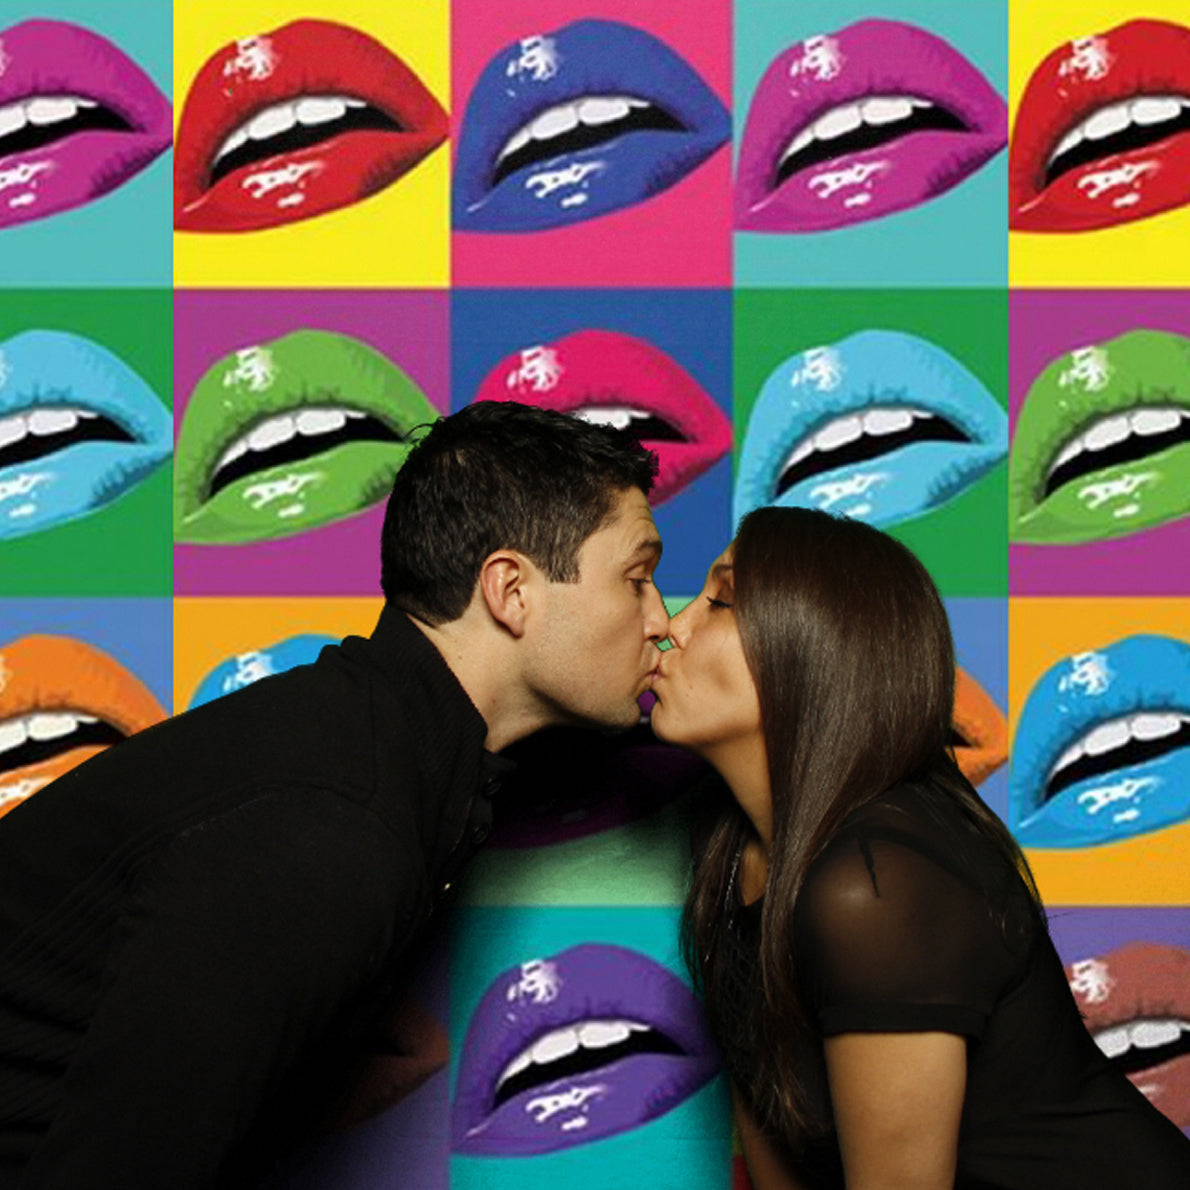 Couple kissing in a green screen photo booth with colorful pop-art background